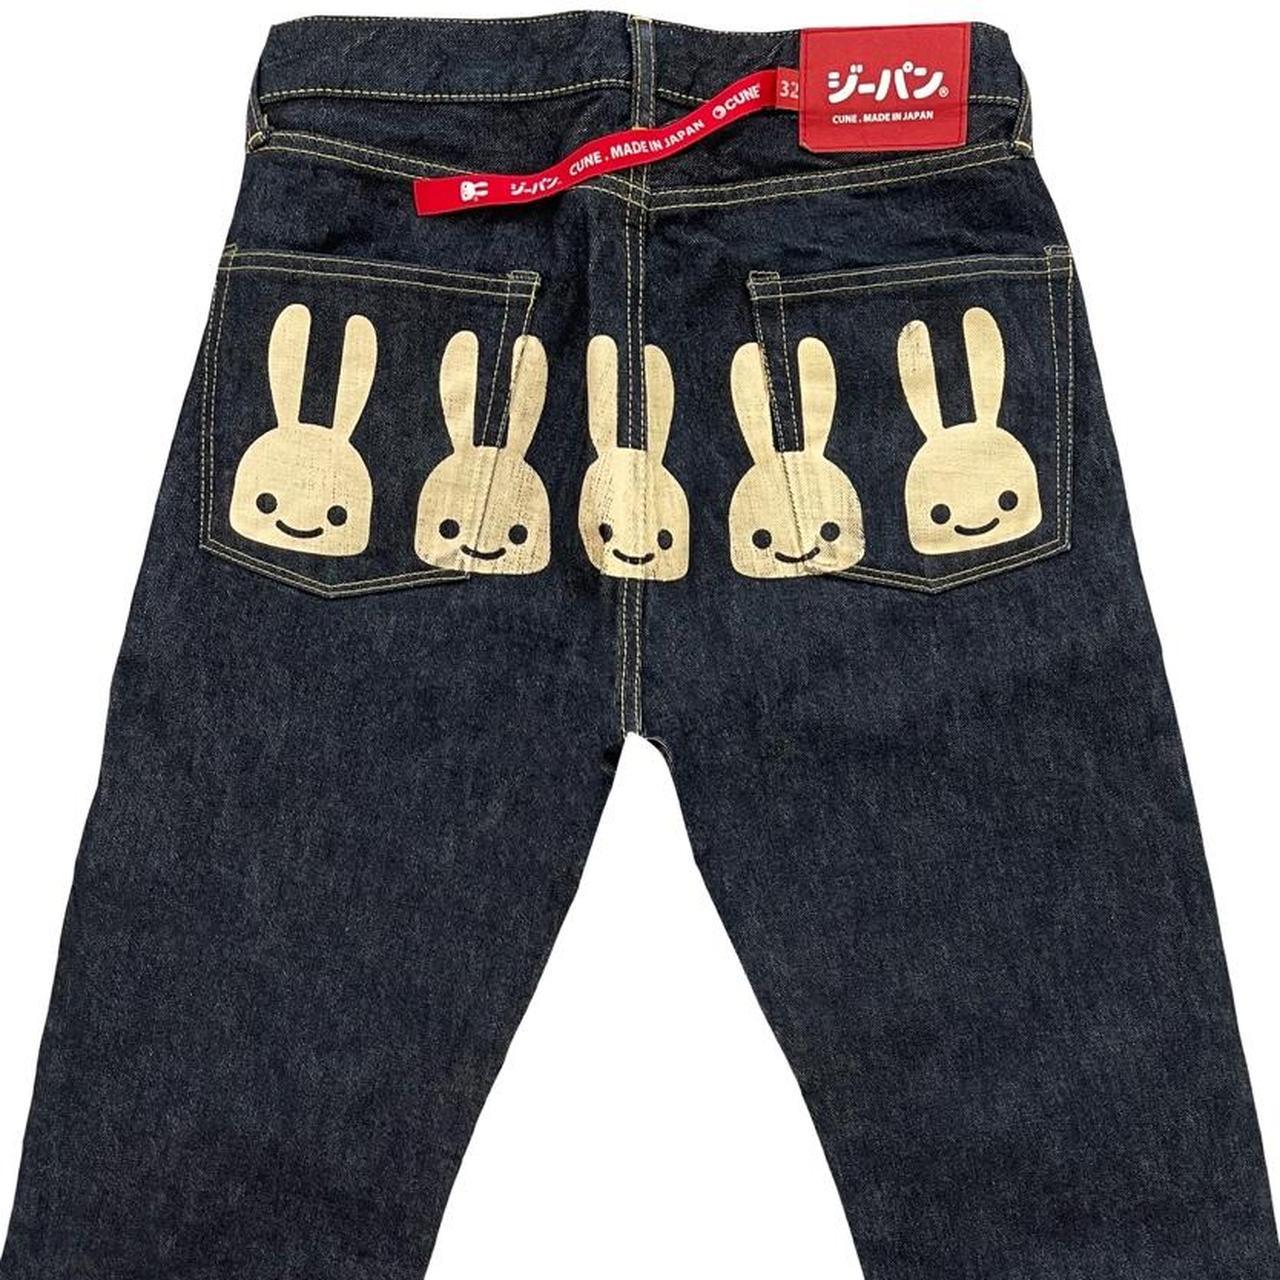 Cune Bunny Jeans - Known Source